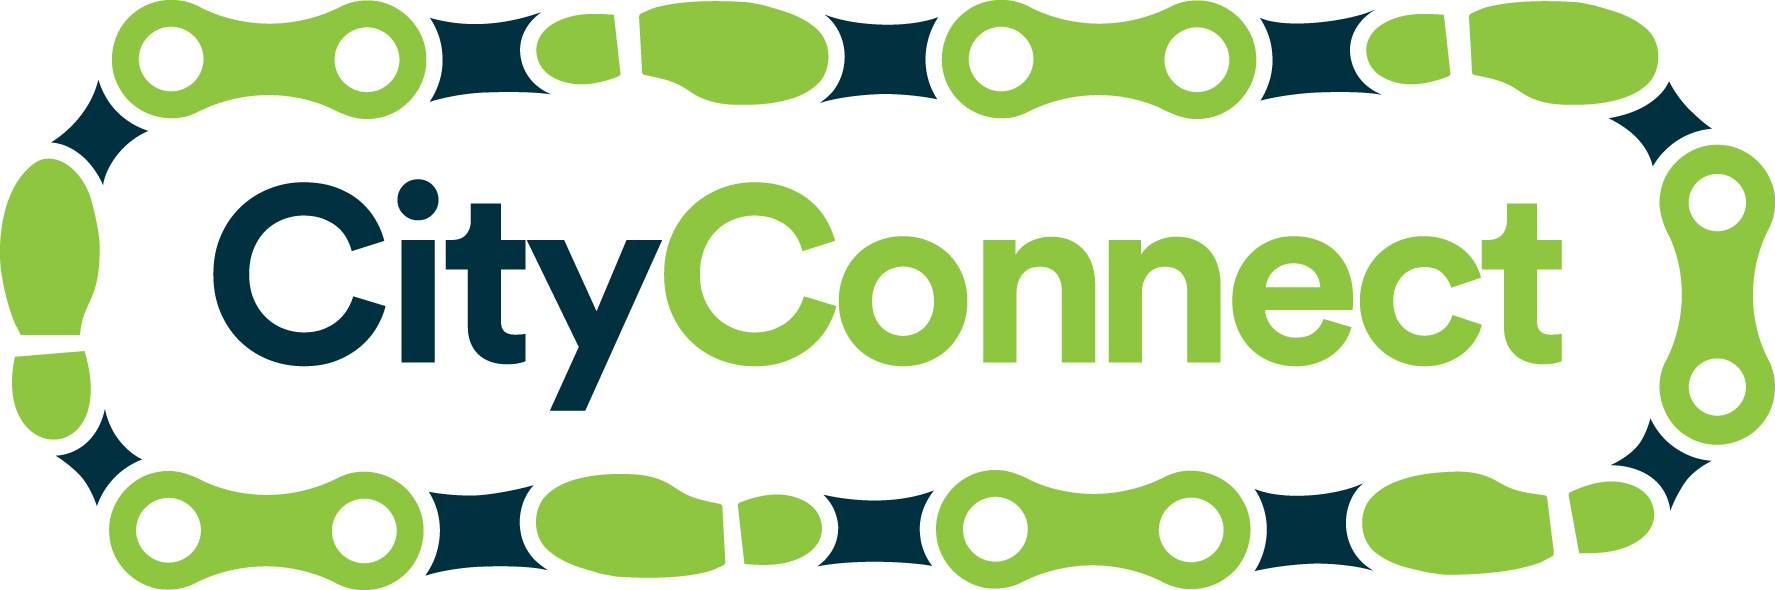 CityConnect: Enabling more people to travel by bike and on foot